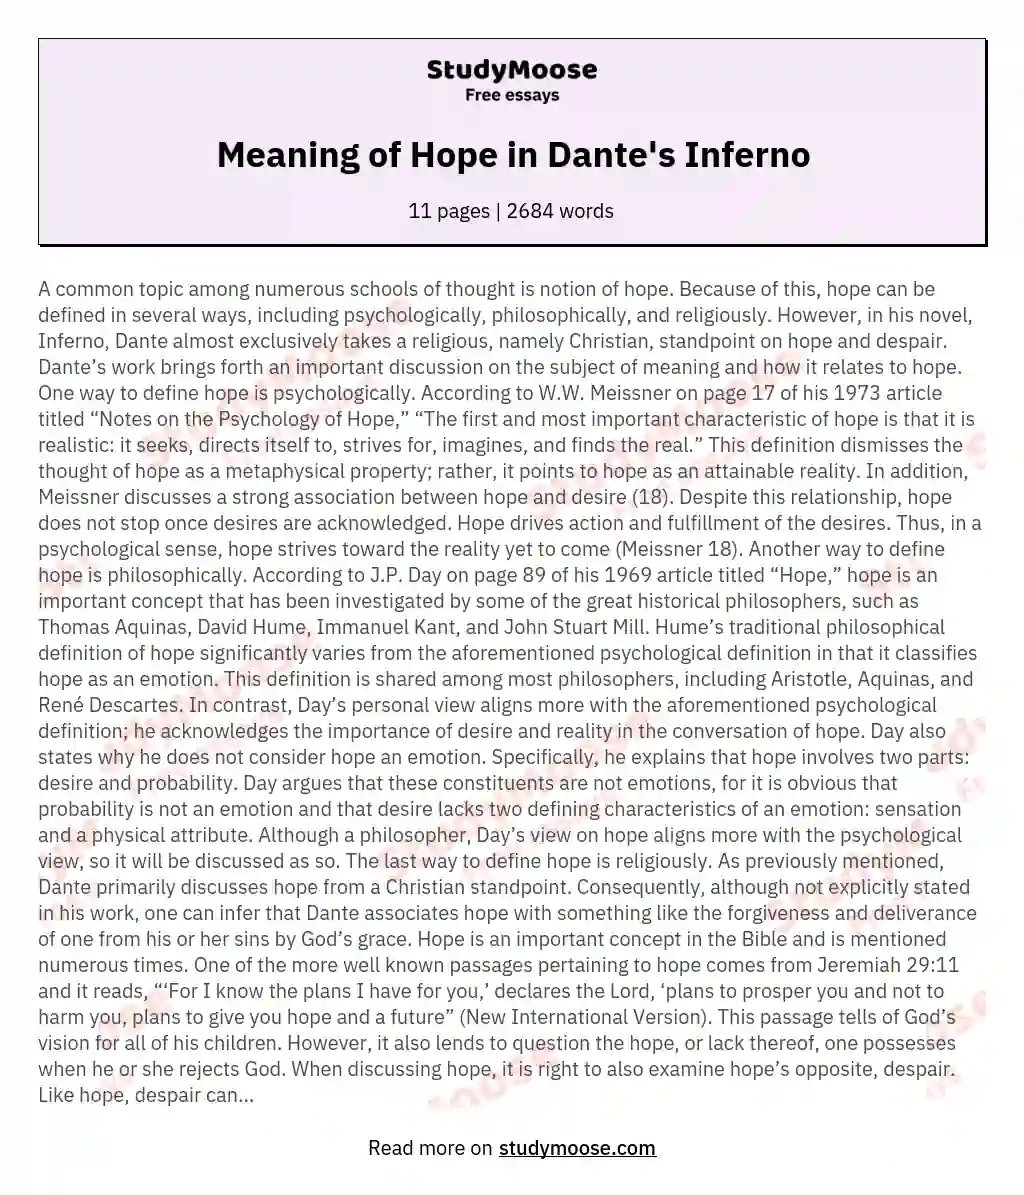 Meaning of Hope in Dante's Inferno essay